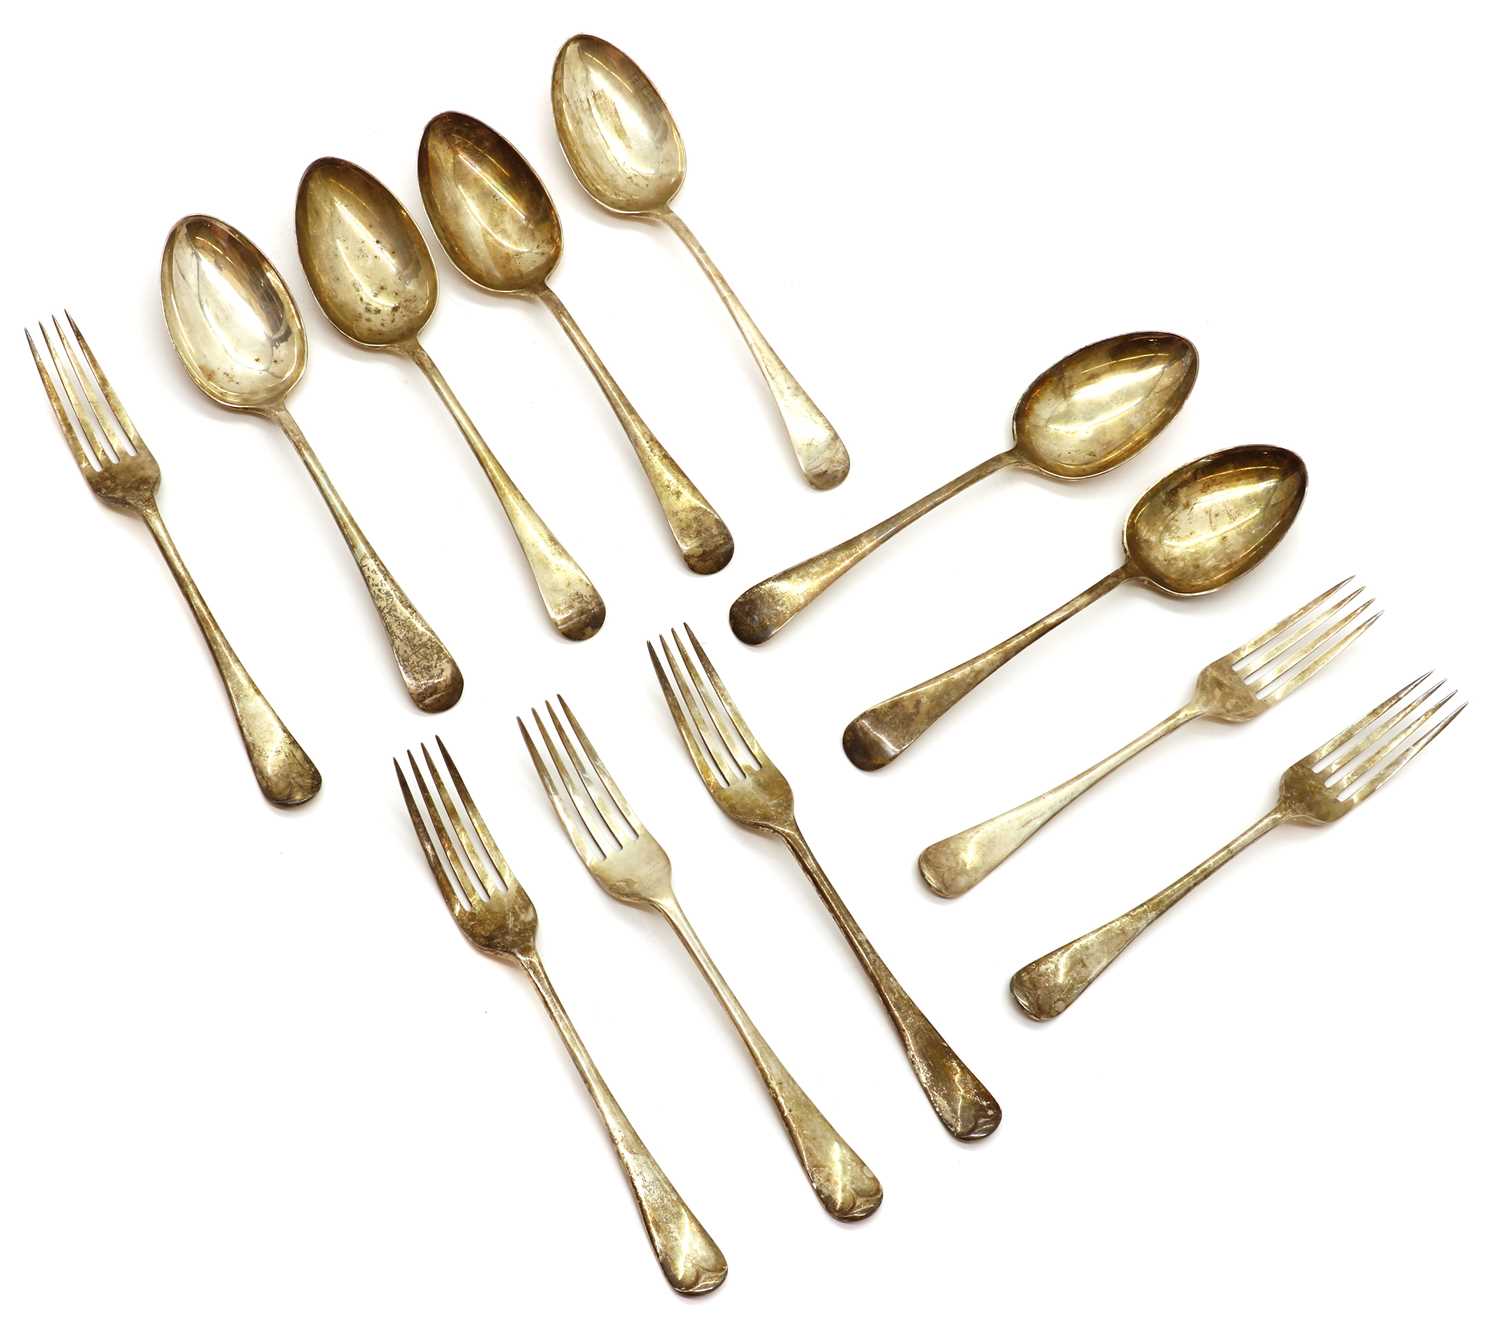 A set of silver tablespoons and forks